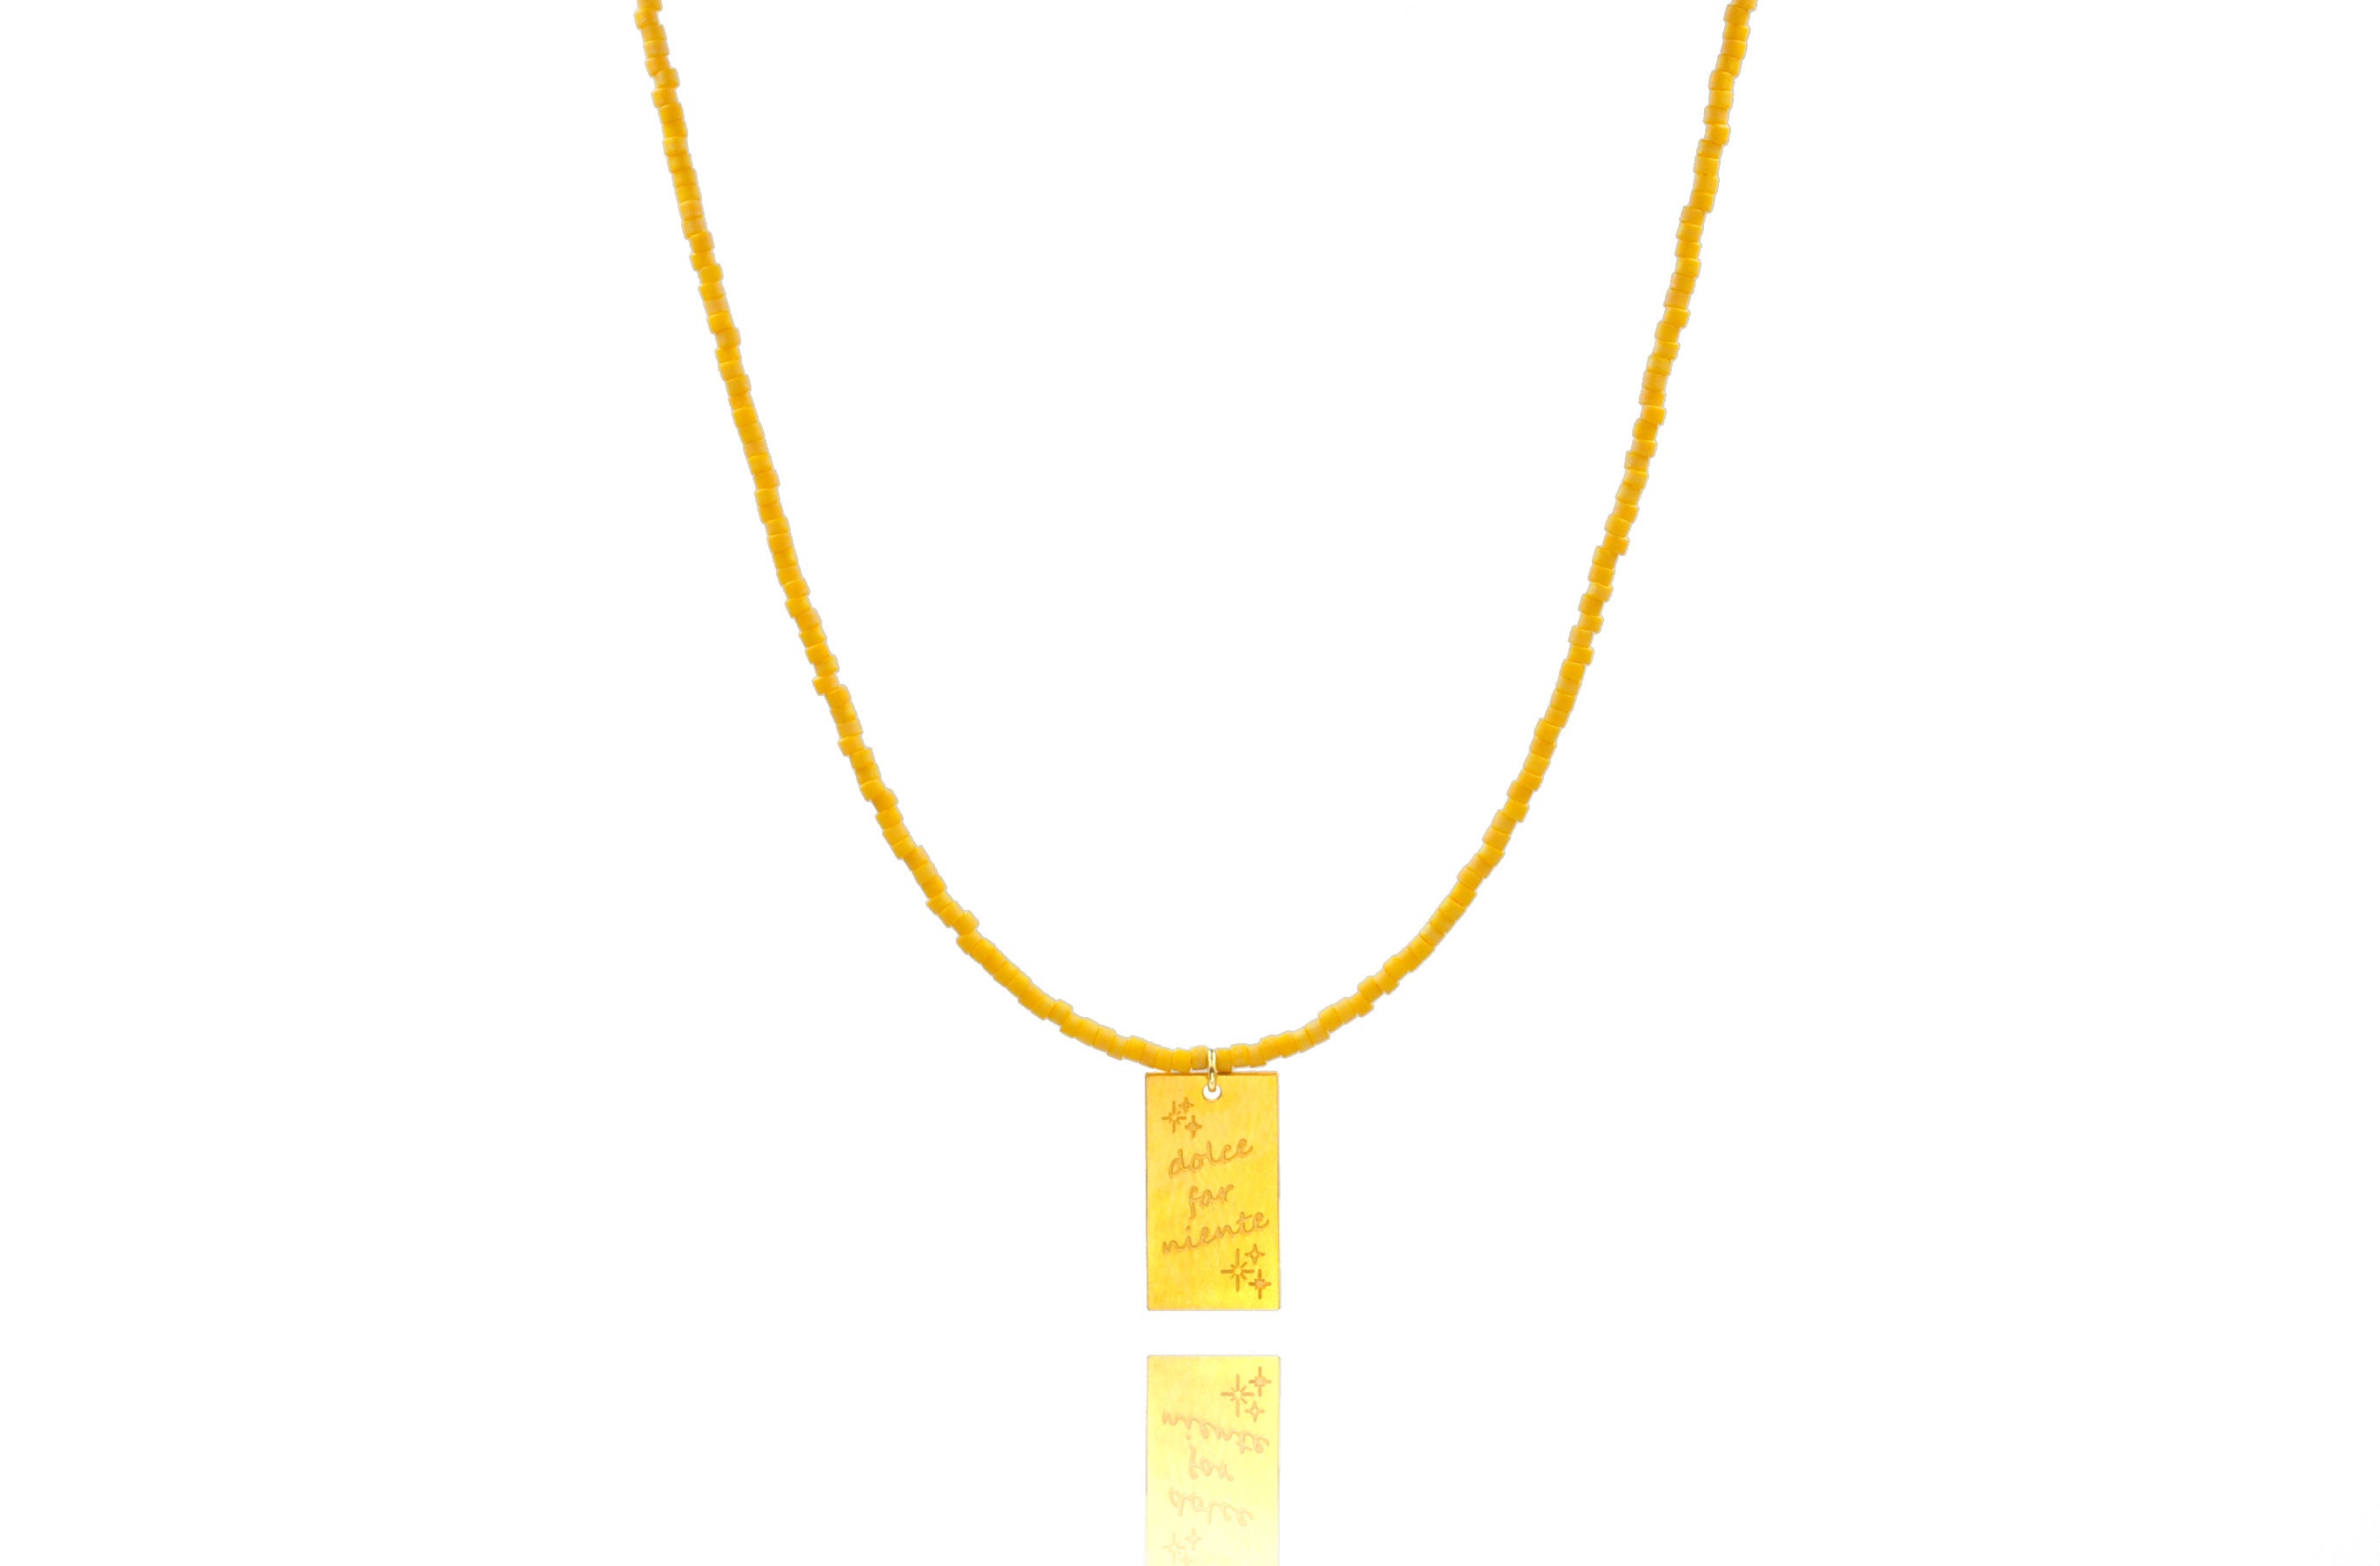 'Dolce Far Niente' Yellow Necklace